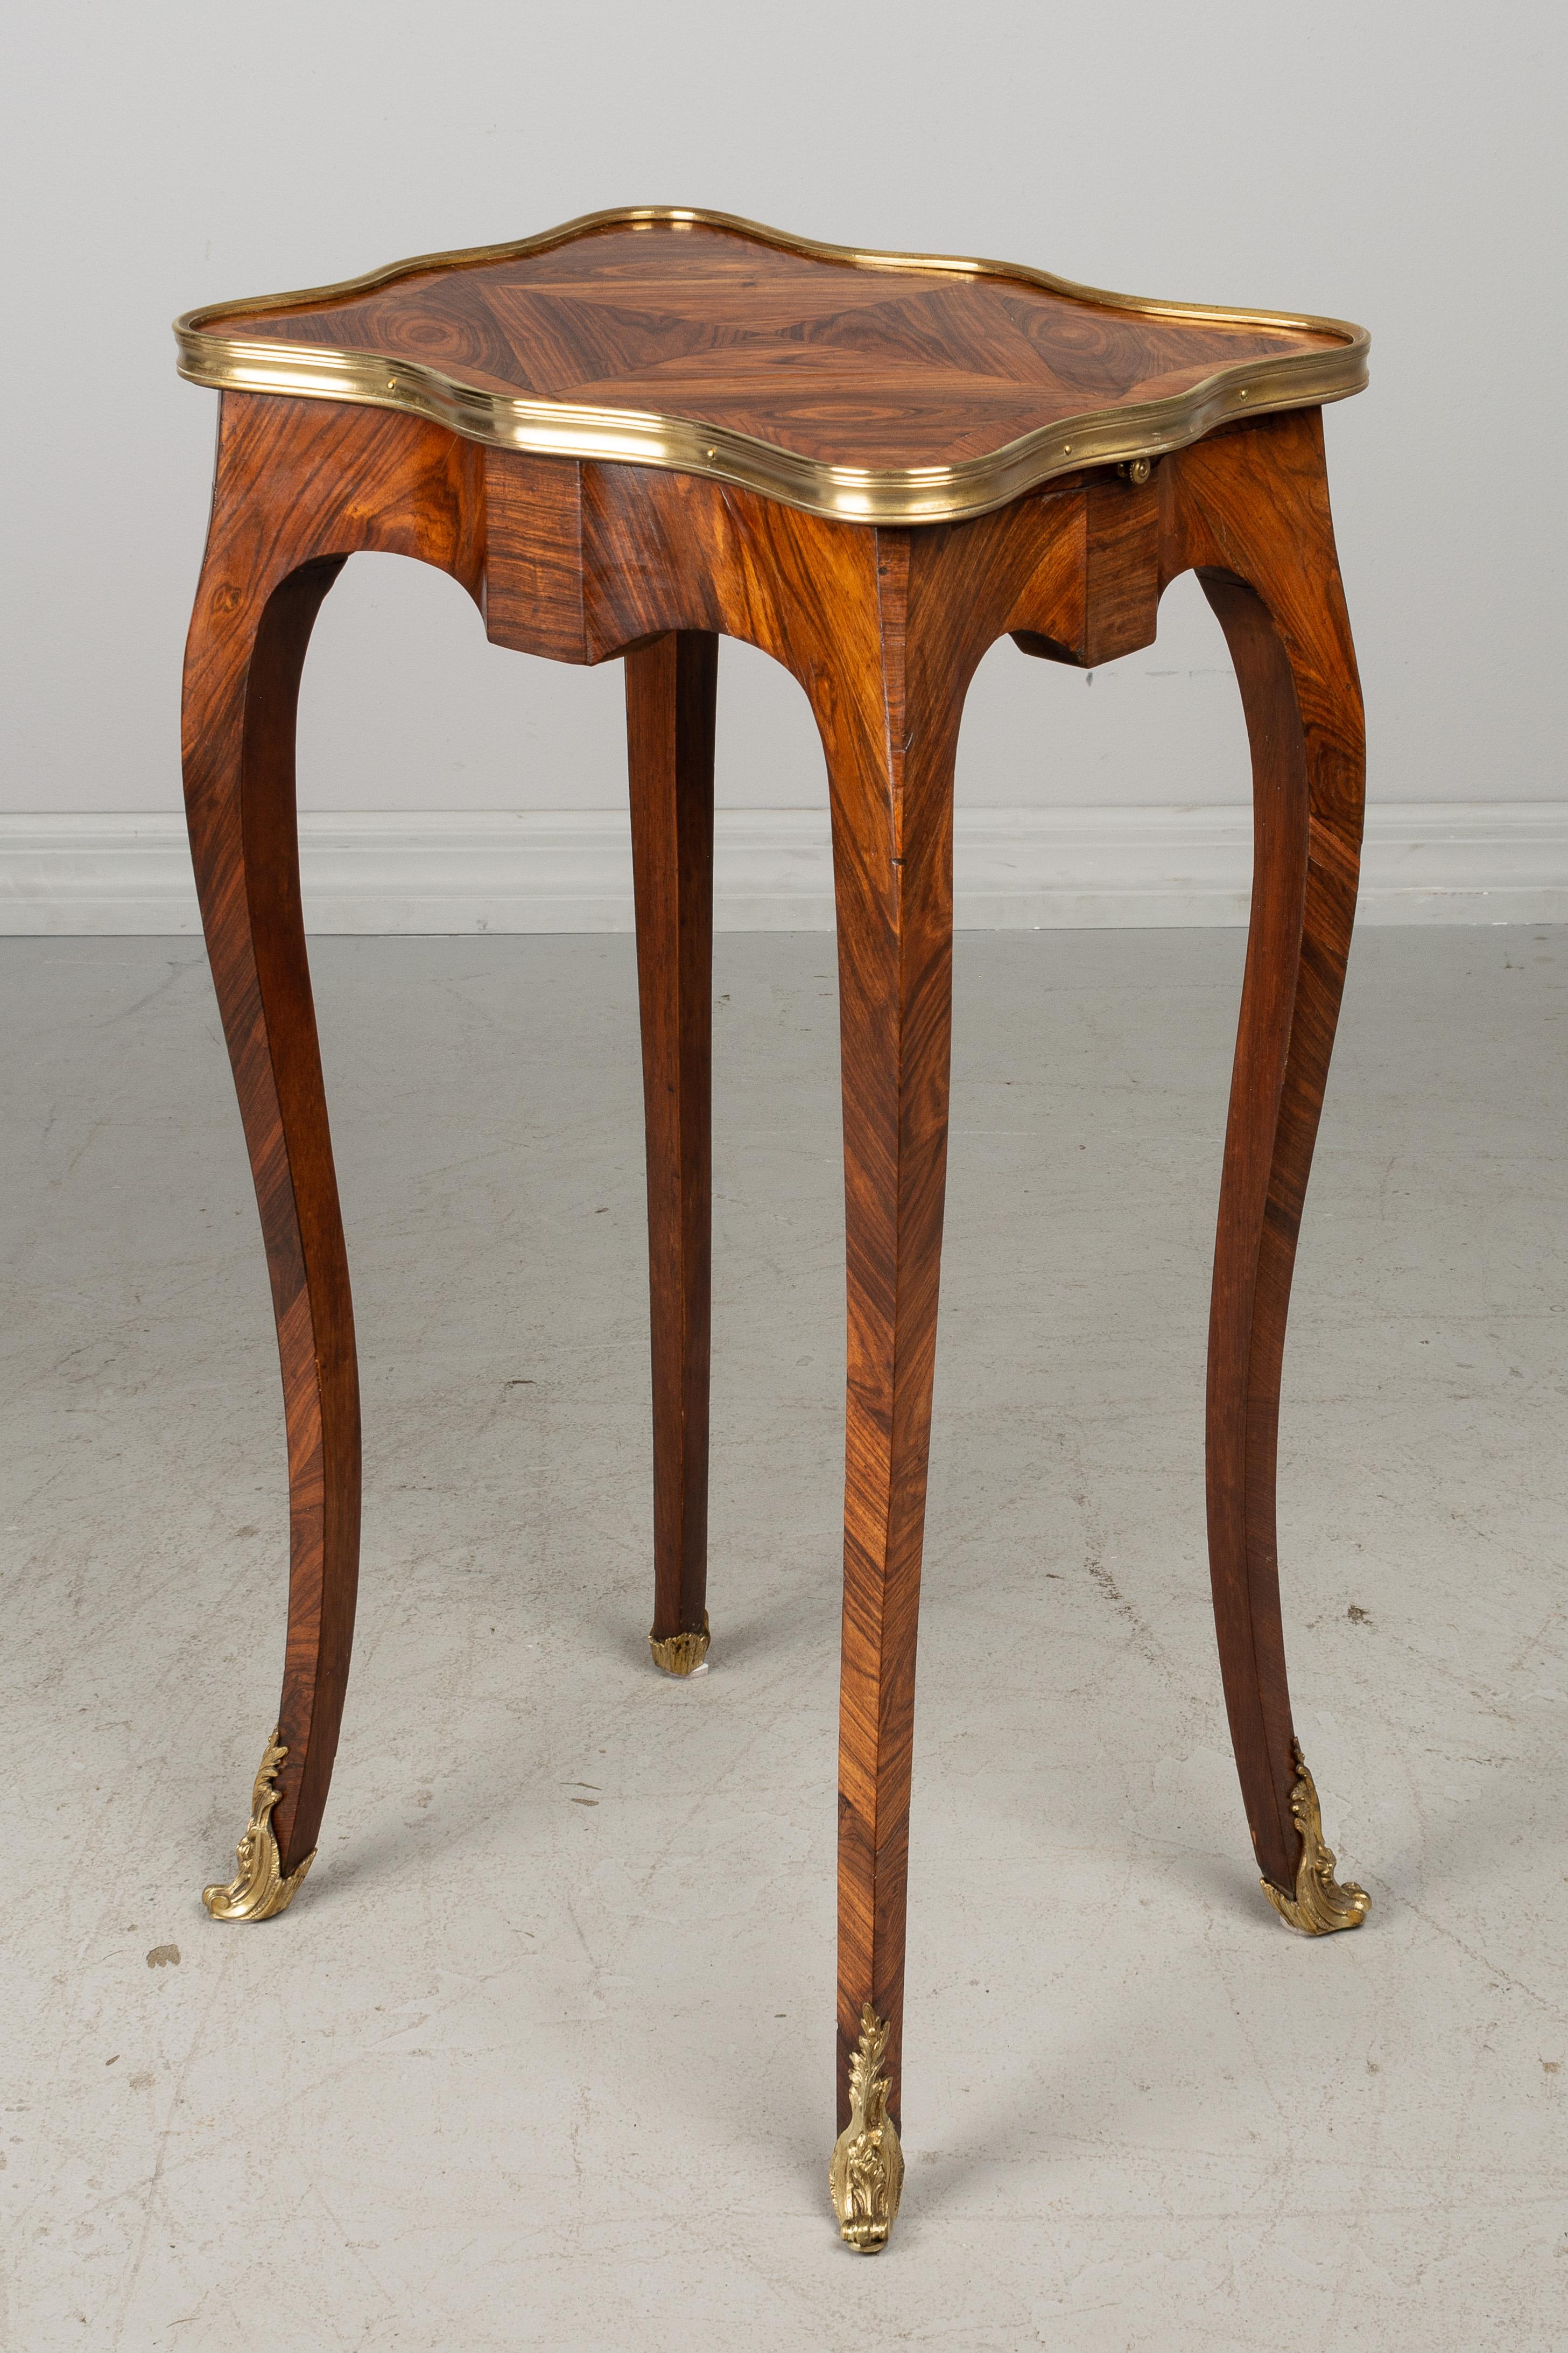 A fine Louis XV style French marquetry side table with inlaid veneer of bois de Violette rosewood. Hidden dovetailed drawer and a small pullout / pull-out tray with leather surface. Polished bronze trim surrounds the shaped tabletop. Slim curved